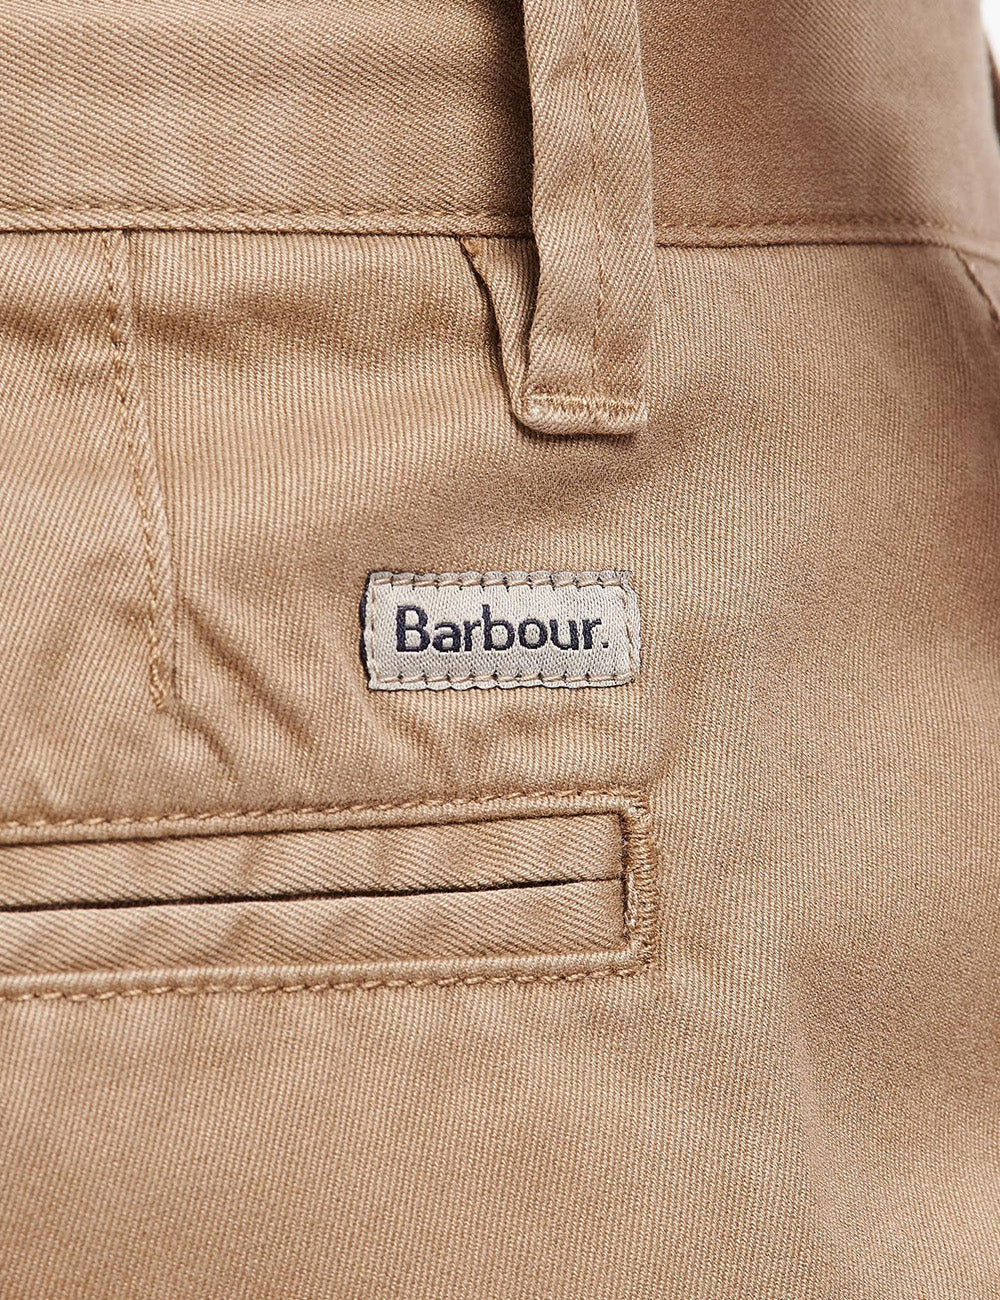 Barbour branded label on the back of the shorts